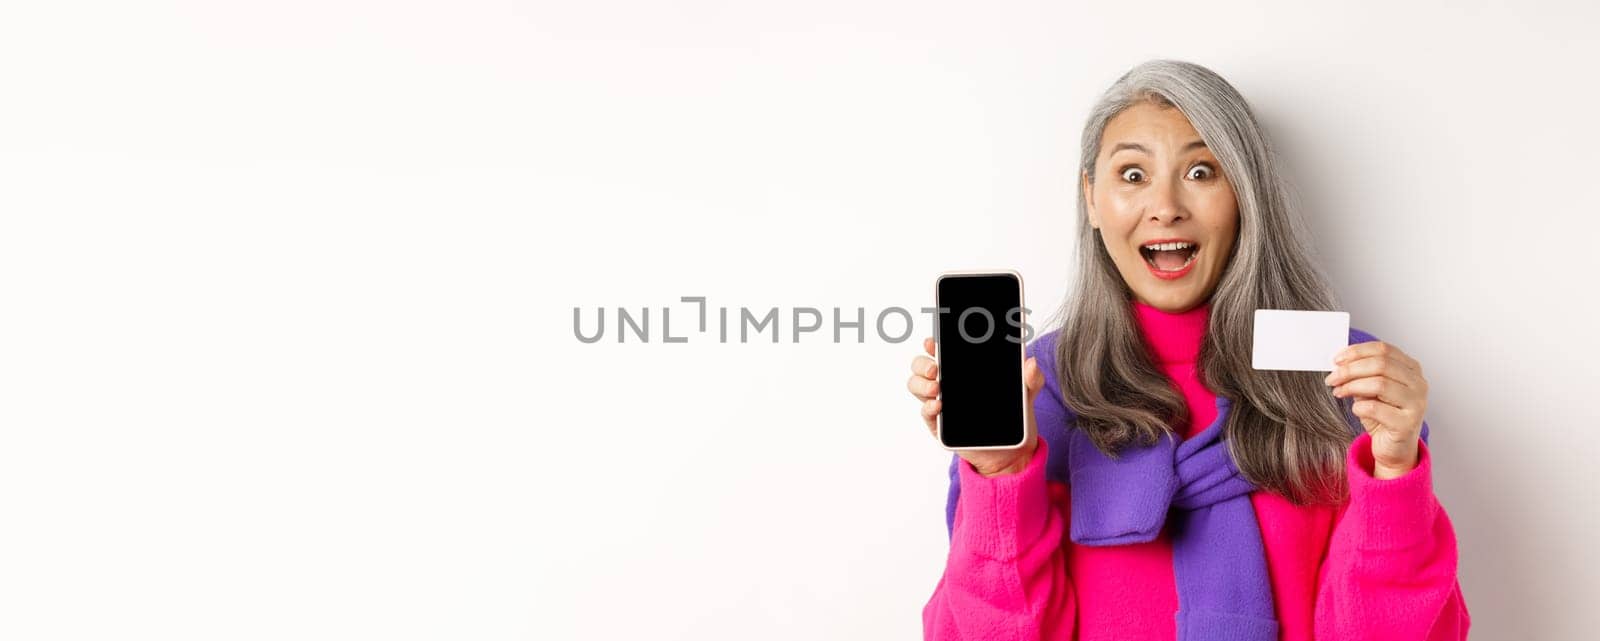 Online shopping. Closeup of amazed asian senior woman showing blank mobile screen and plastic credit card, looking happy, standing over white background.